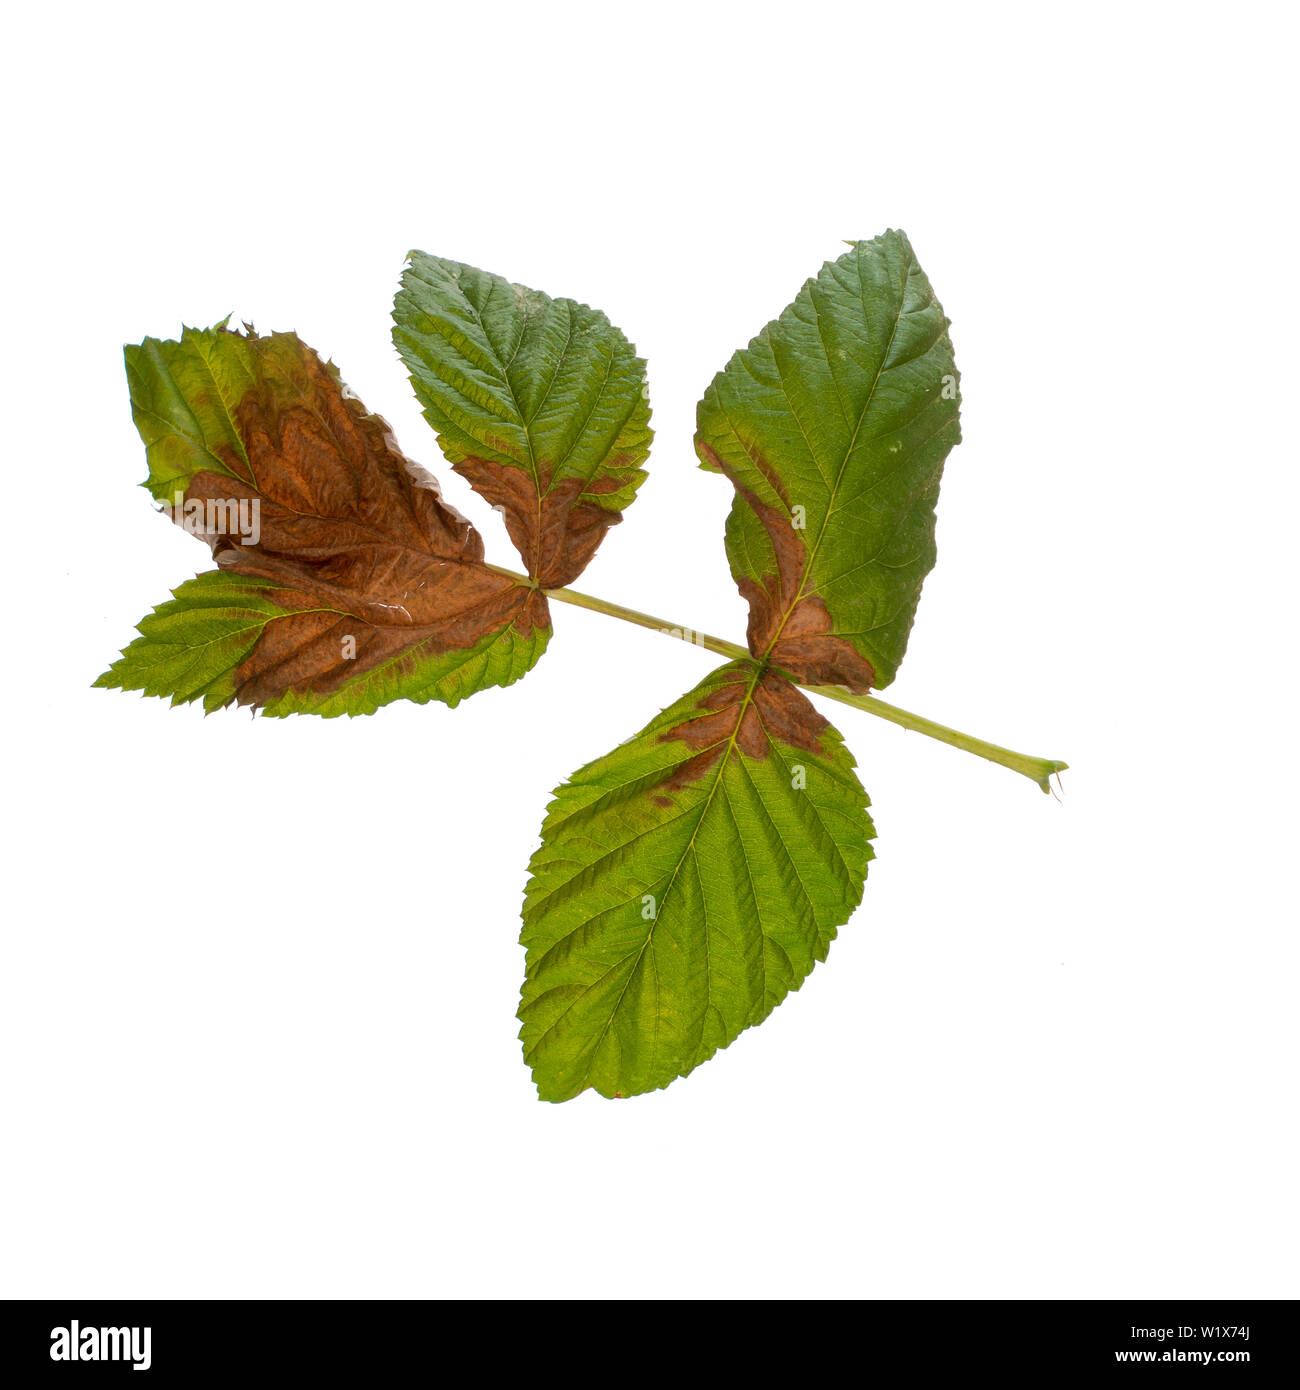 Raspberry leaves turned crisp and brown, probably damaged by sun and or drought. Isolated on white. Stock Photo